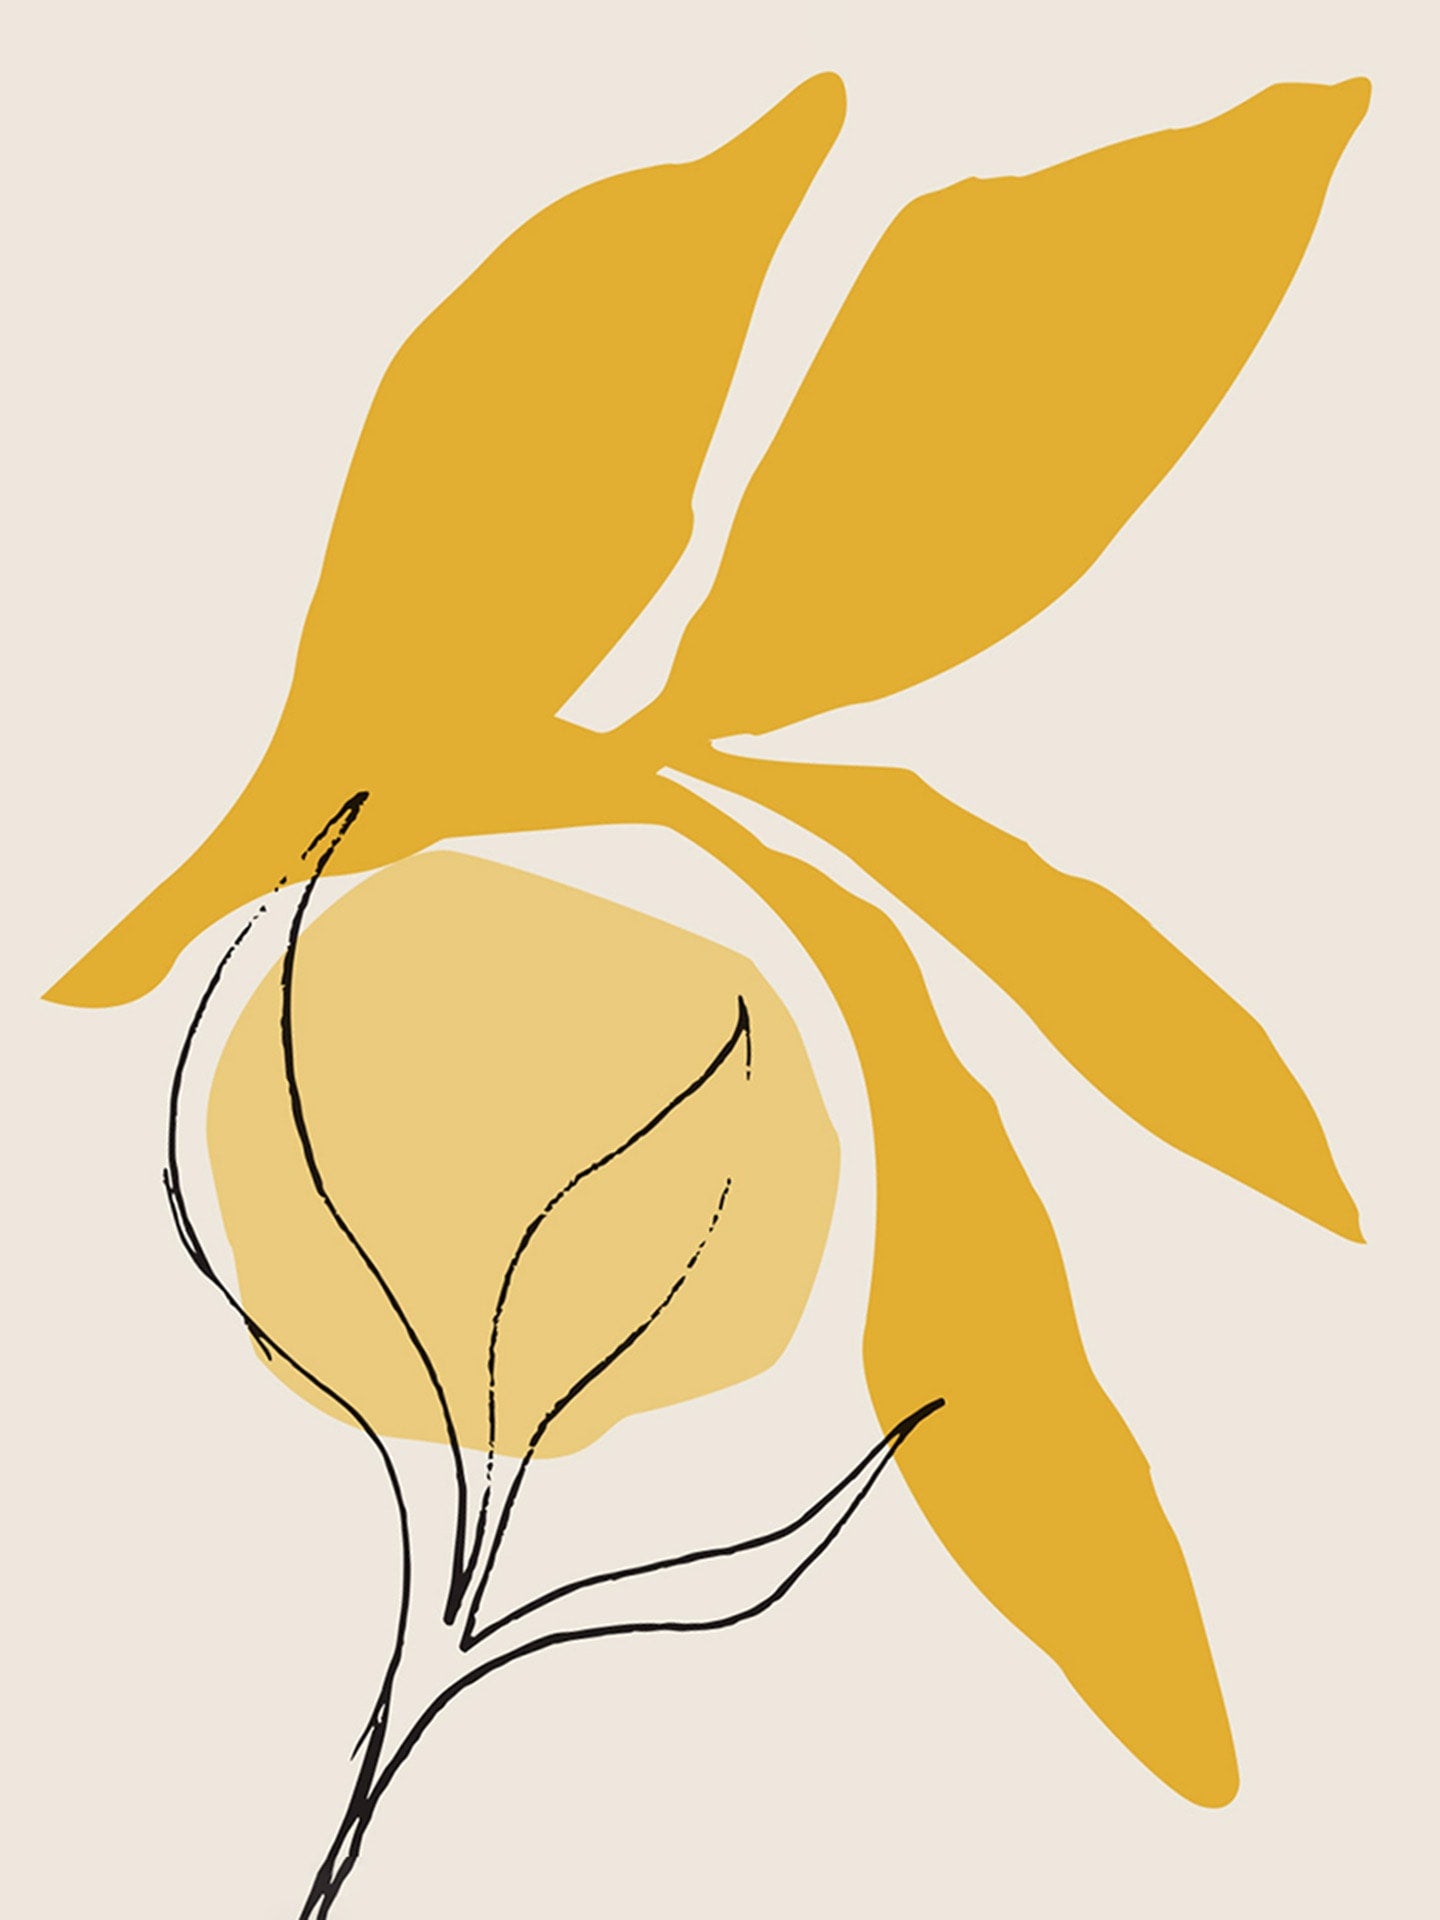 An illustration of a yellow leaf on a beige background.